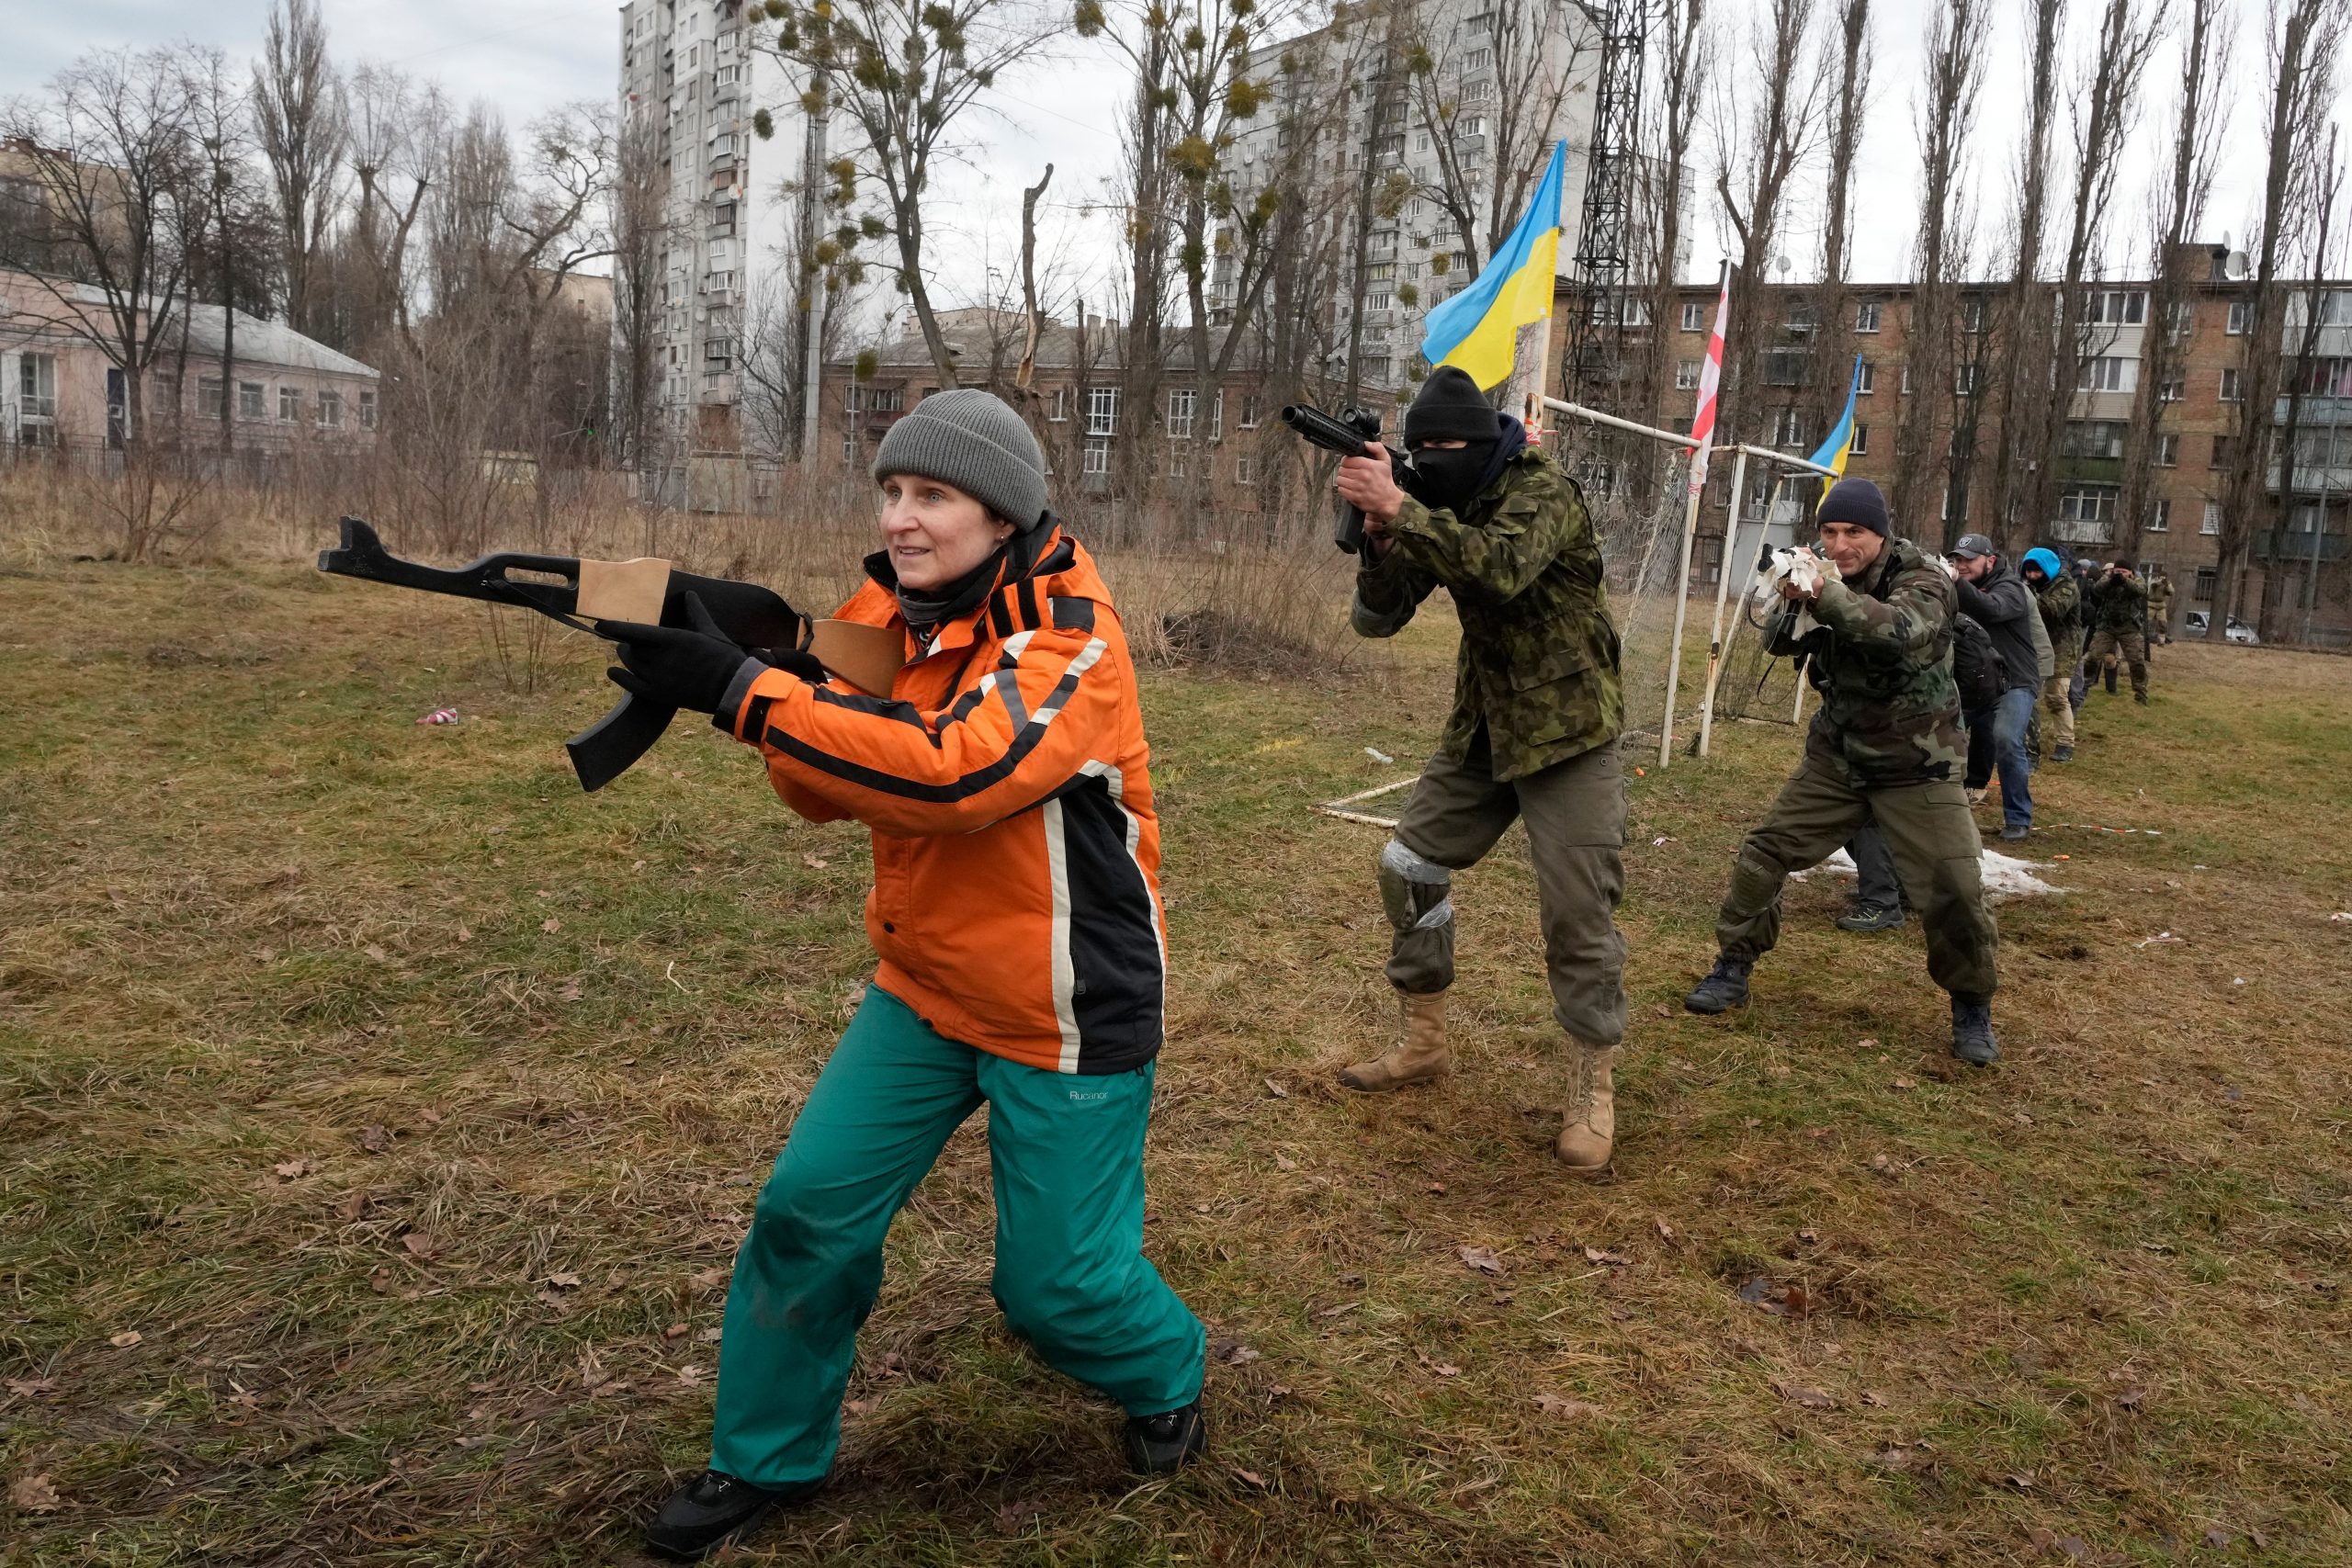 Civilians train with members of the Georgian Legion, a paramilitary unit formed mainly by ethnic Georgian volunteers to fight against Russian forces in Ukraine in 2014, in Kyiv, Ukraine, Saturday, Feb. 19, 2022.